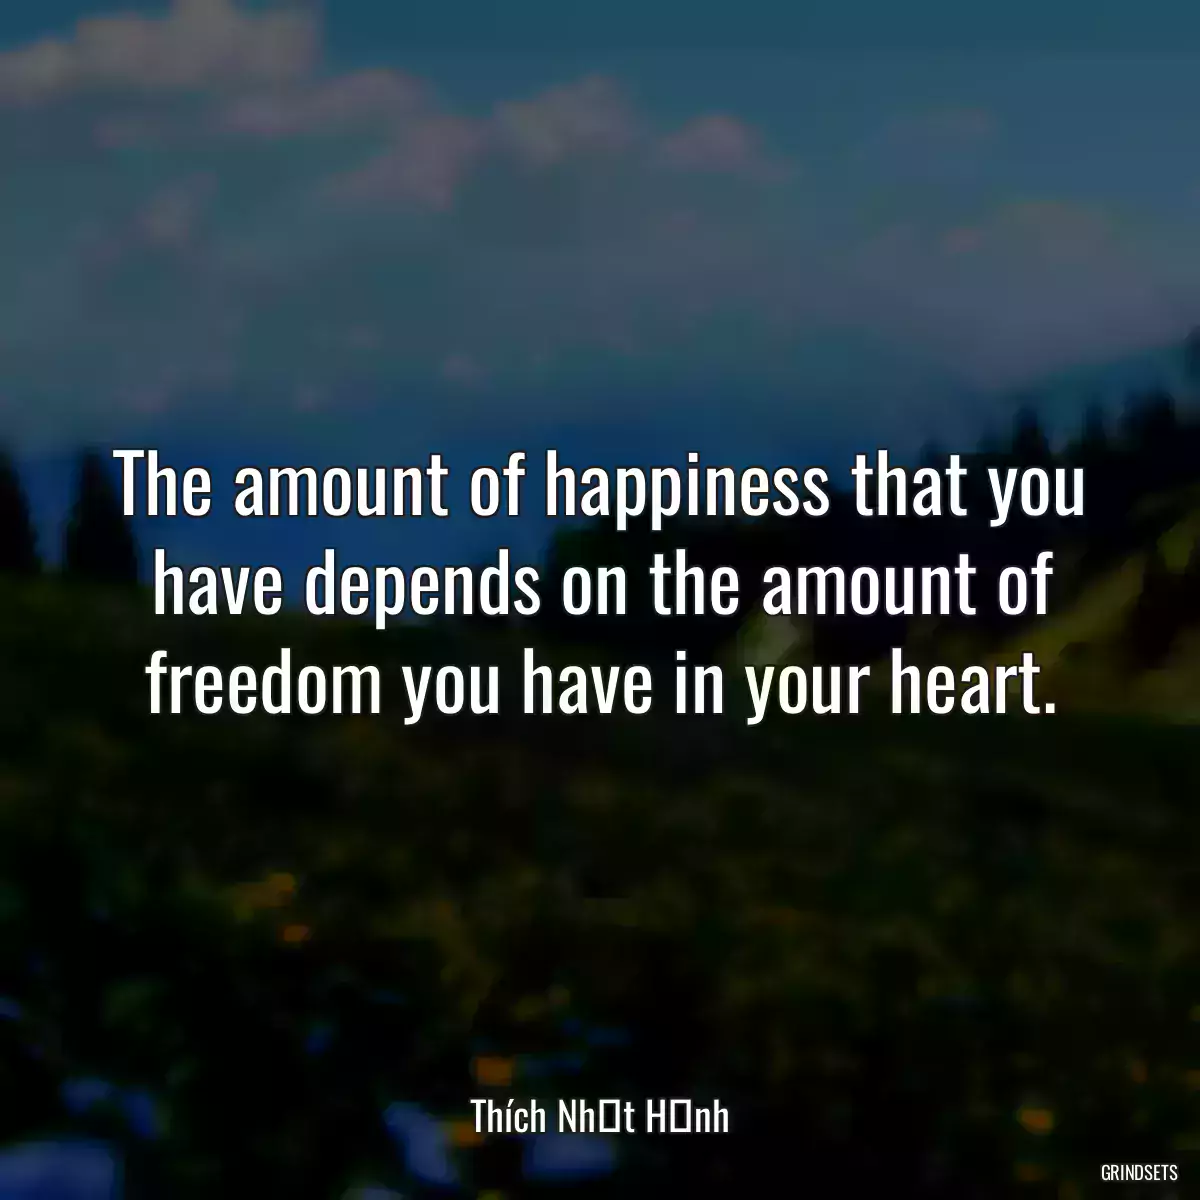 The amount of happiness that you have depends on the amount of freedom you have in your heart.